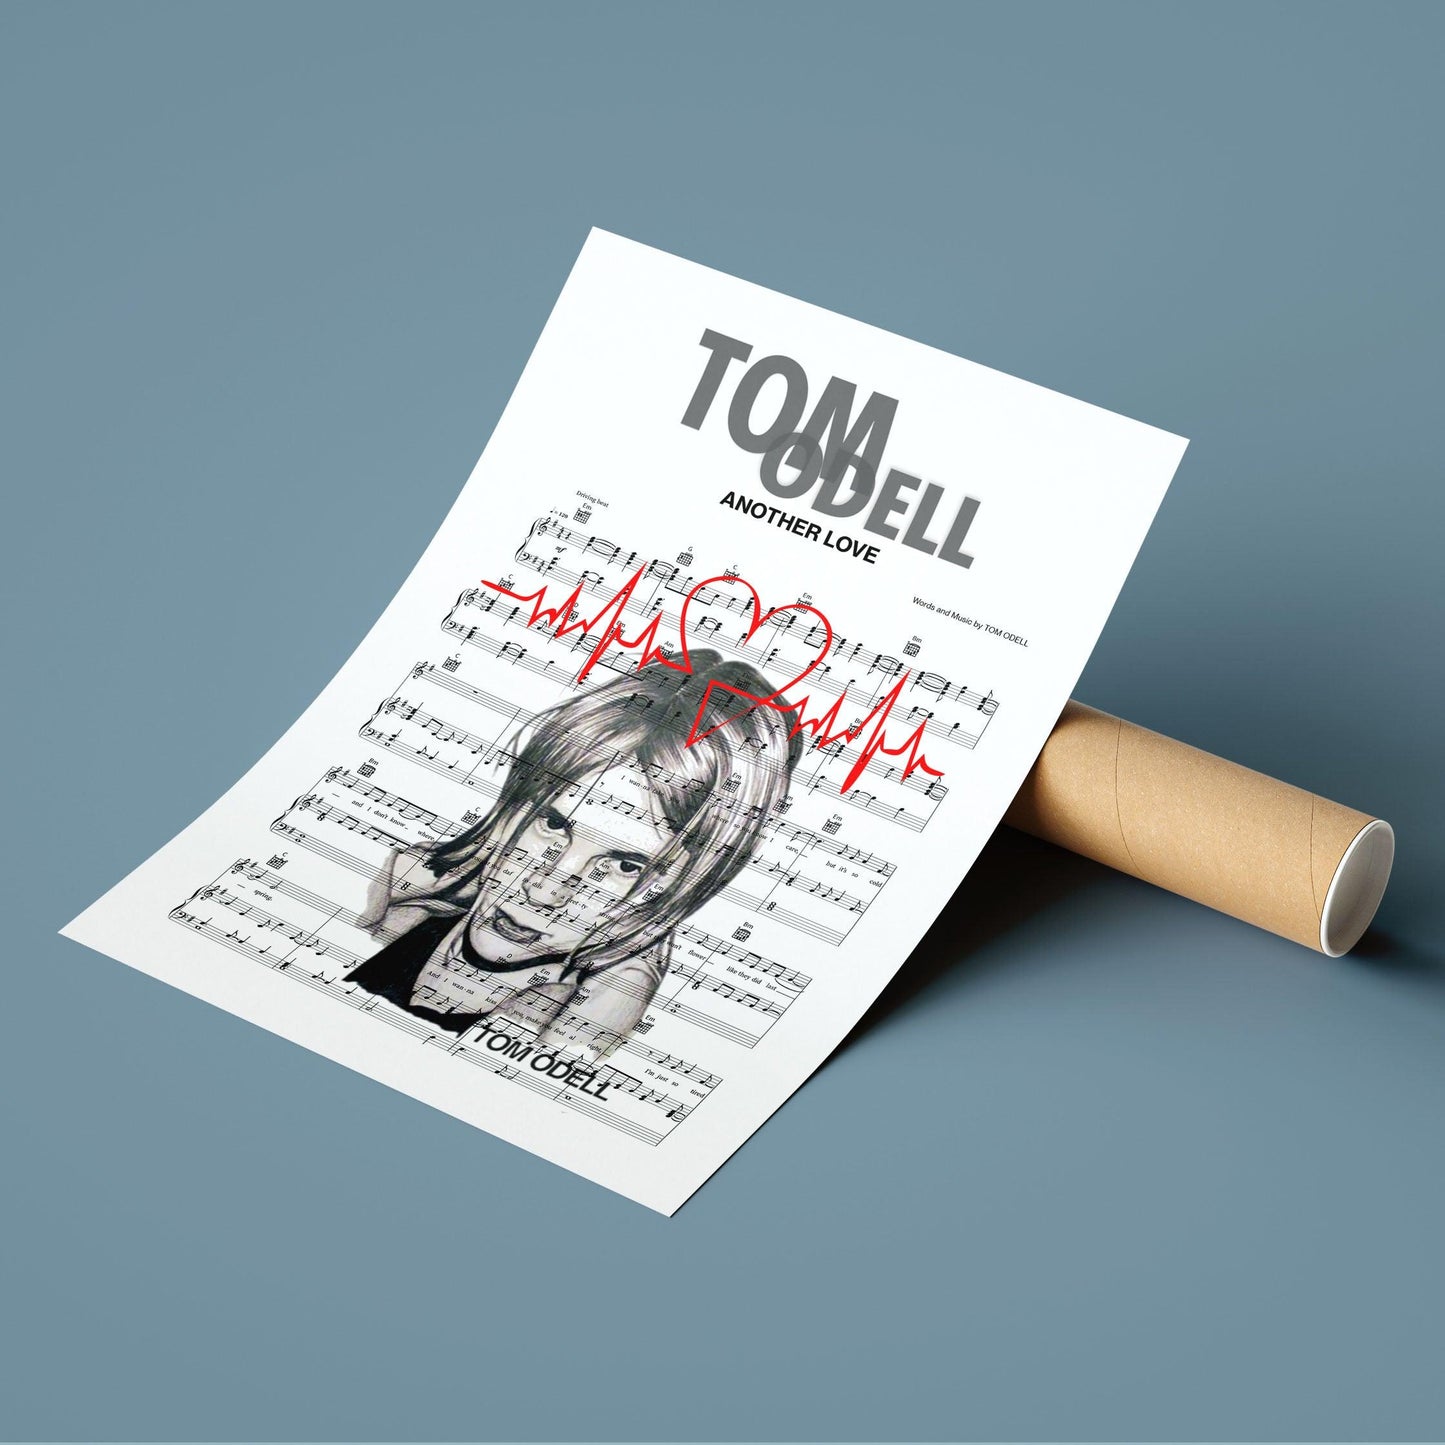 98Types Music Prints Fans. Check out the latest poster from Tom Odell - ANOTHER LOVE. If you're a fan of Tom Odell, then you're going to love this poster. It captures the essence of his music and offers a unique perspective on love. Hang this poster in your home and enjoy it every day.